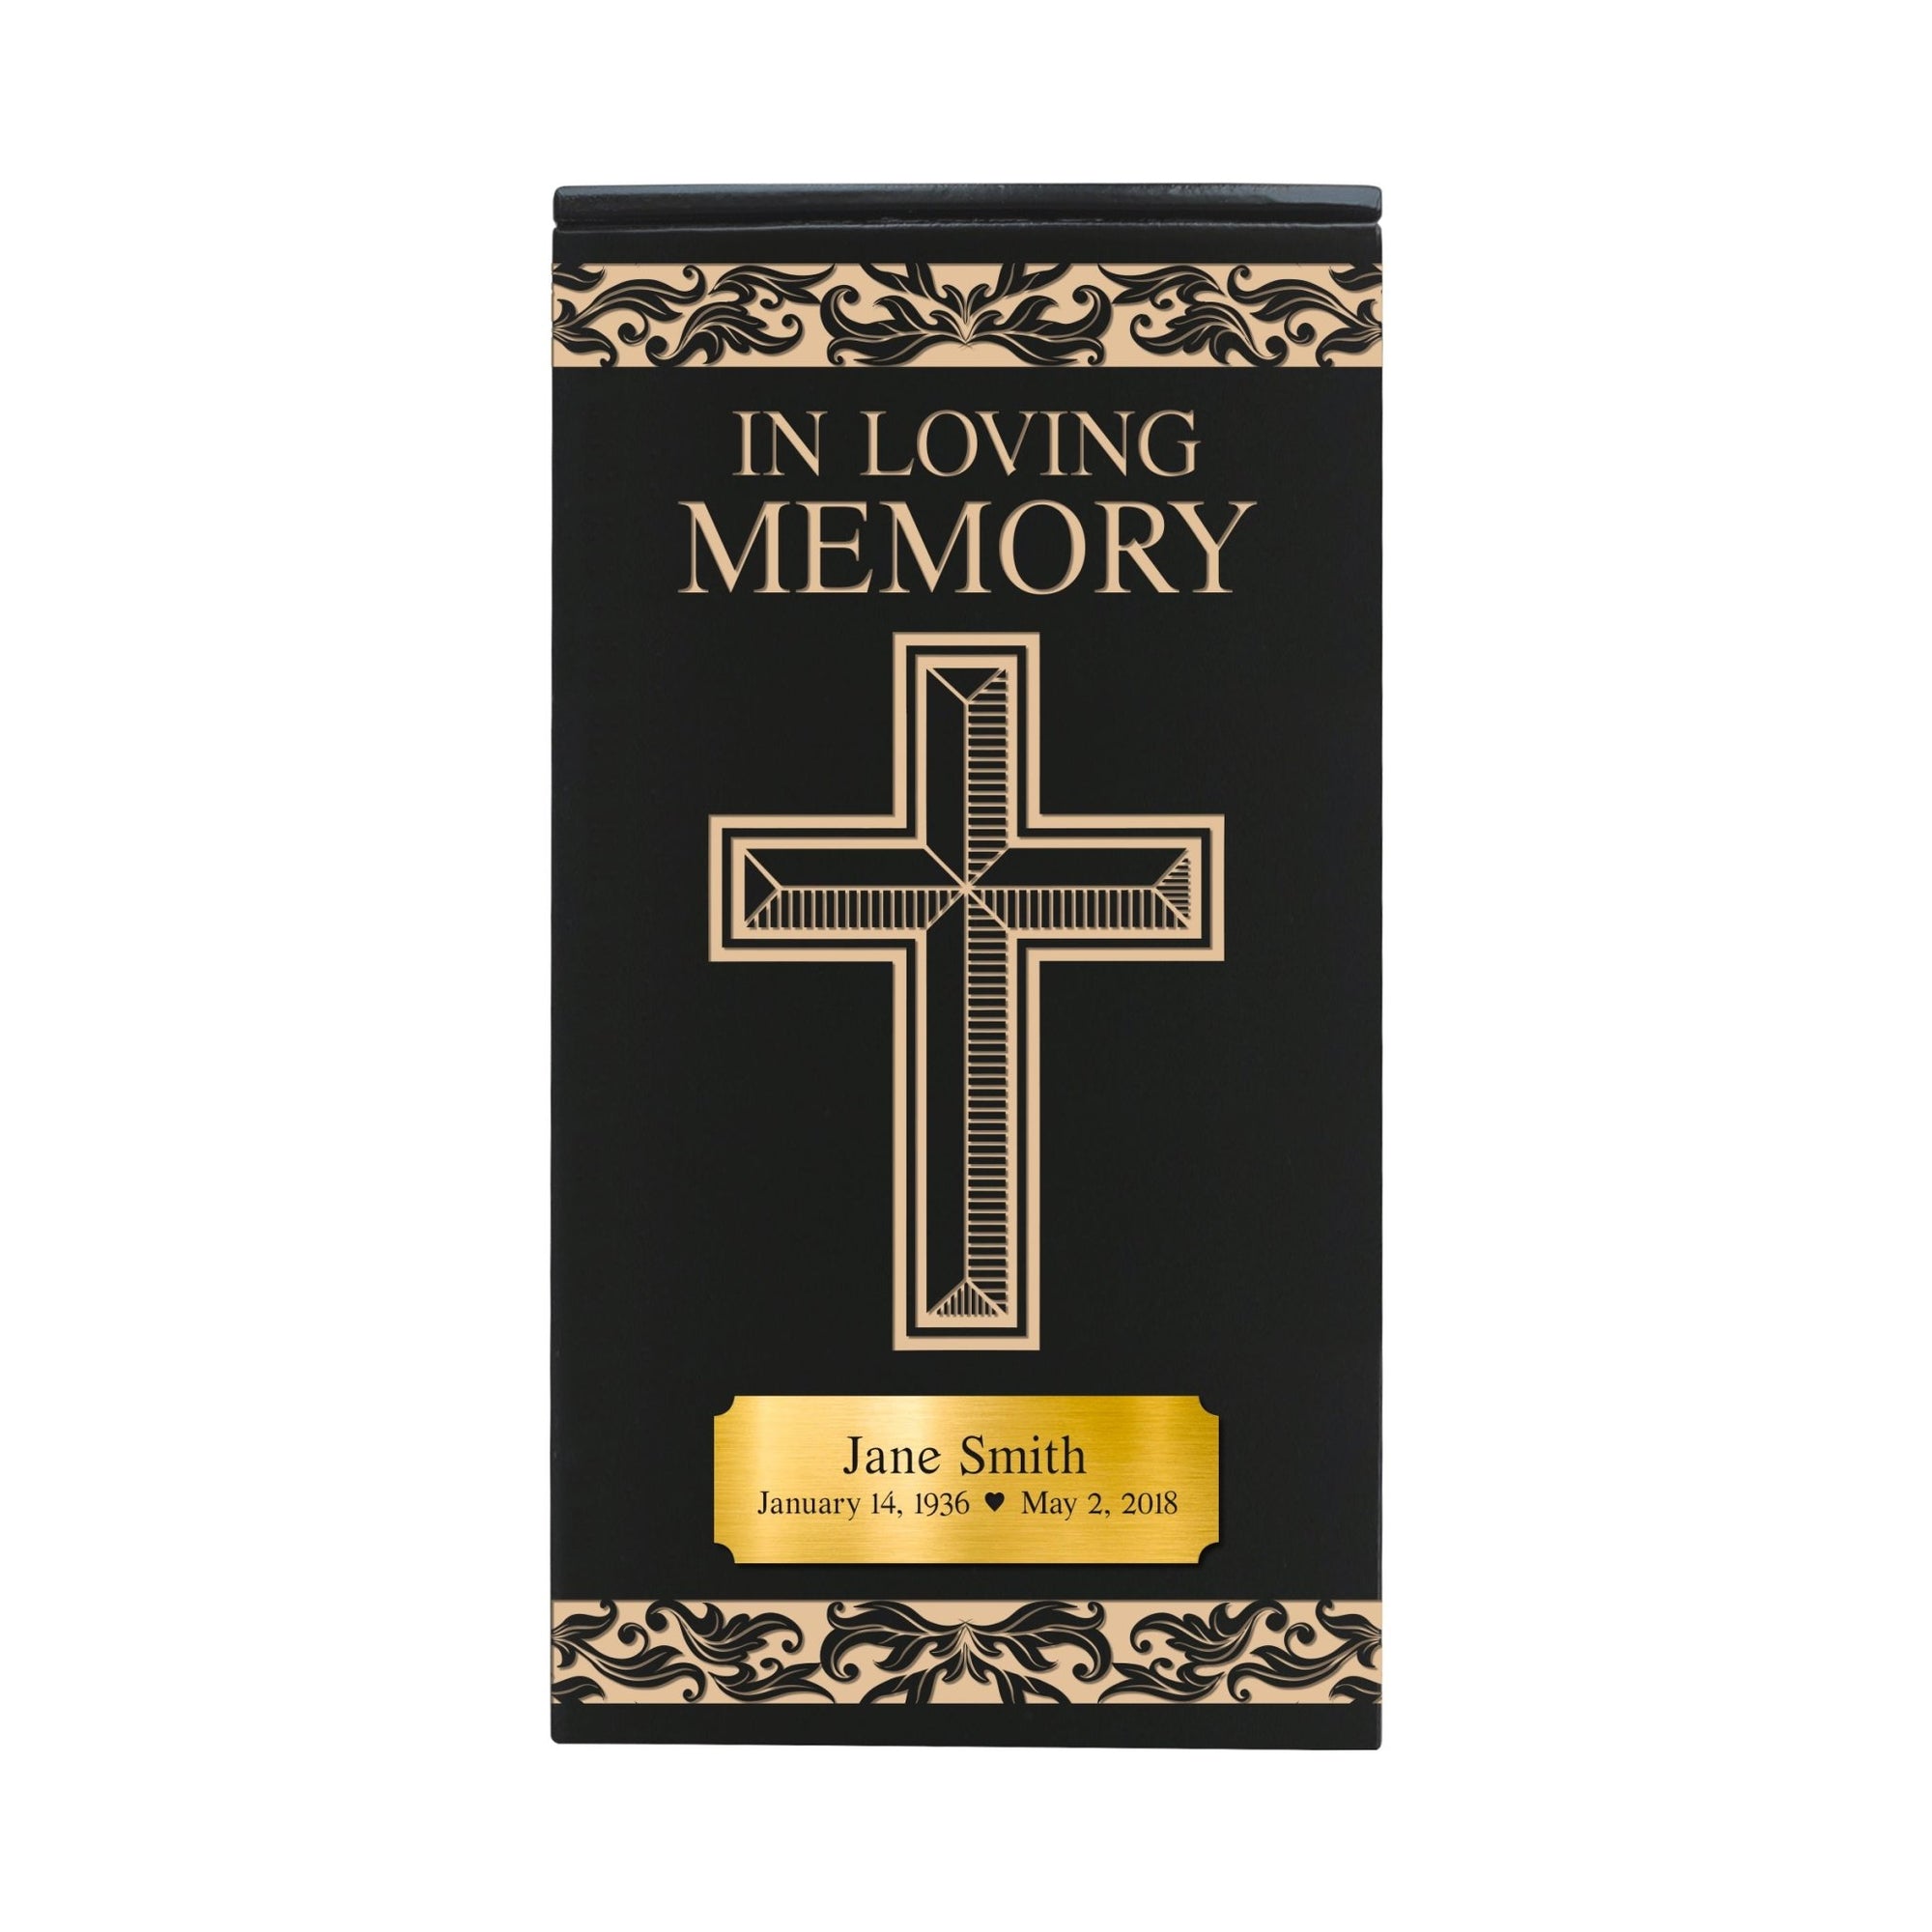 Custom Engraved Memorial Cremation Keepsake Urn Box Holds 100 Cu Inches Of Human Ashes With Gold Name Plate In Loving Memory Cross - LifeSong Milestones